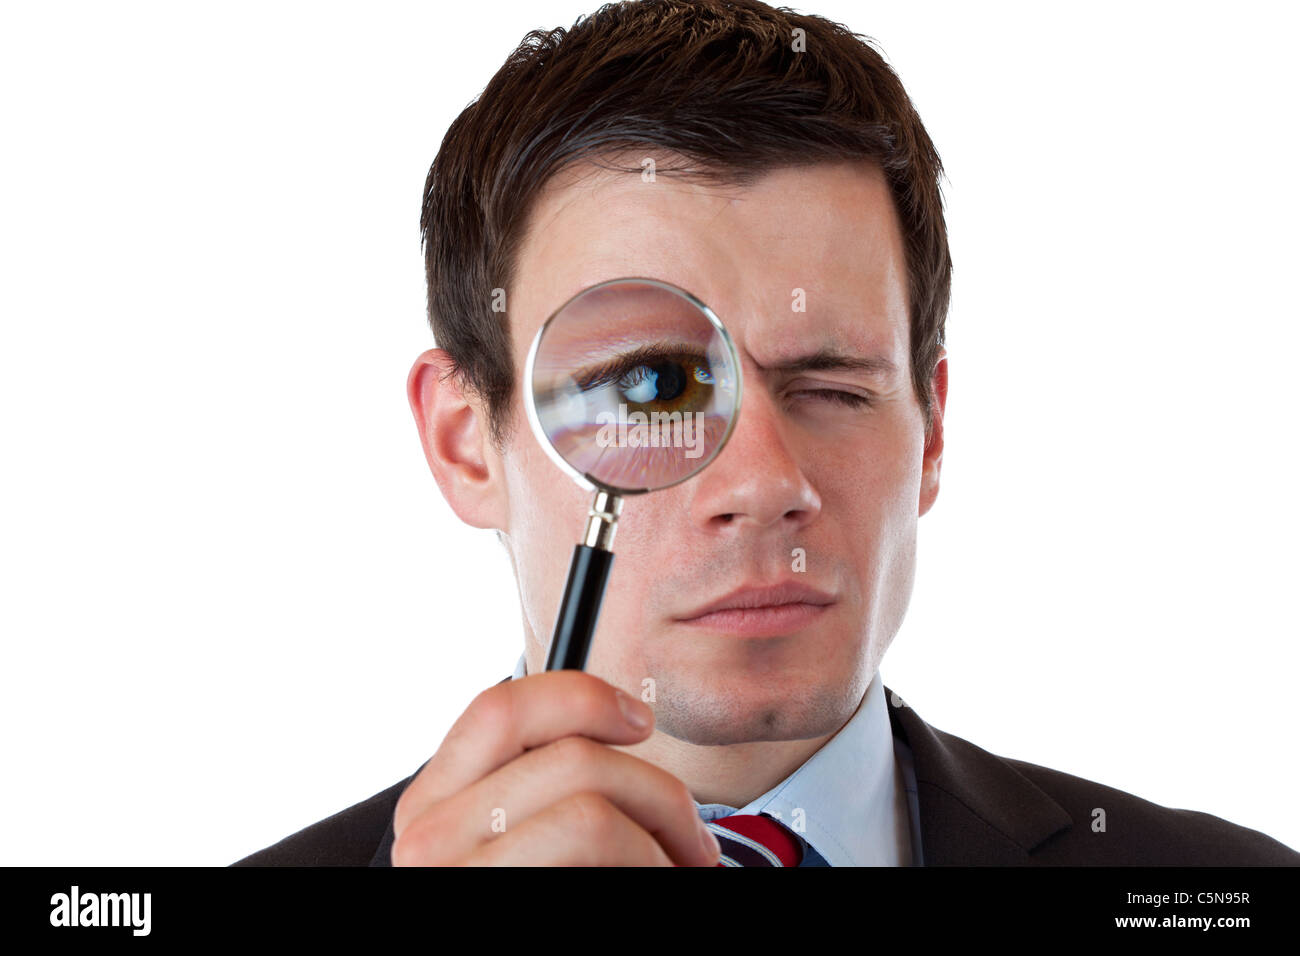 Businessman with magnifying glass in front of his eye. Isolated on white background. Stock Photo